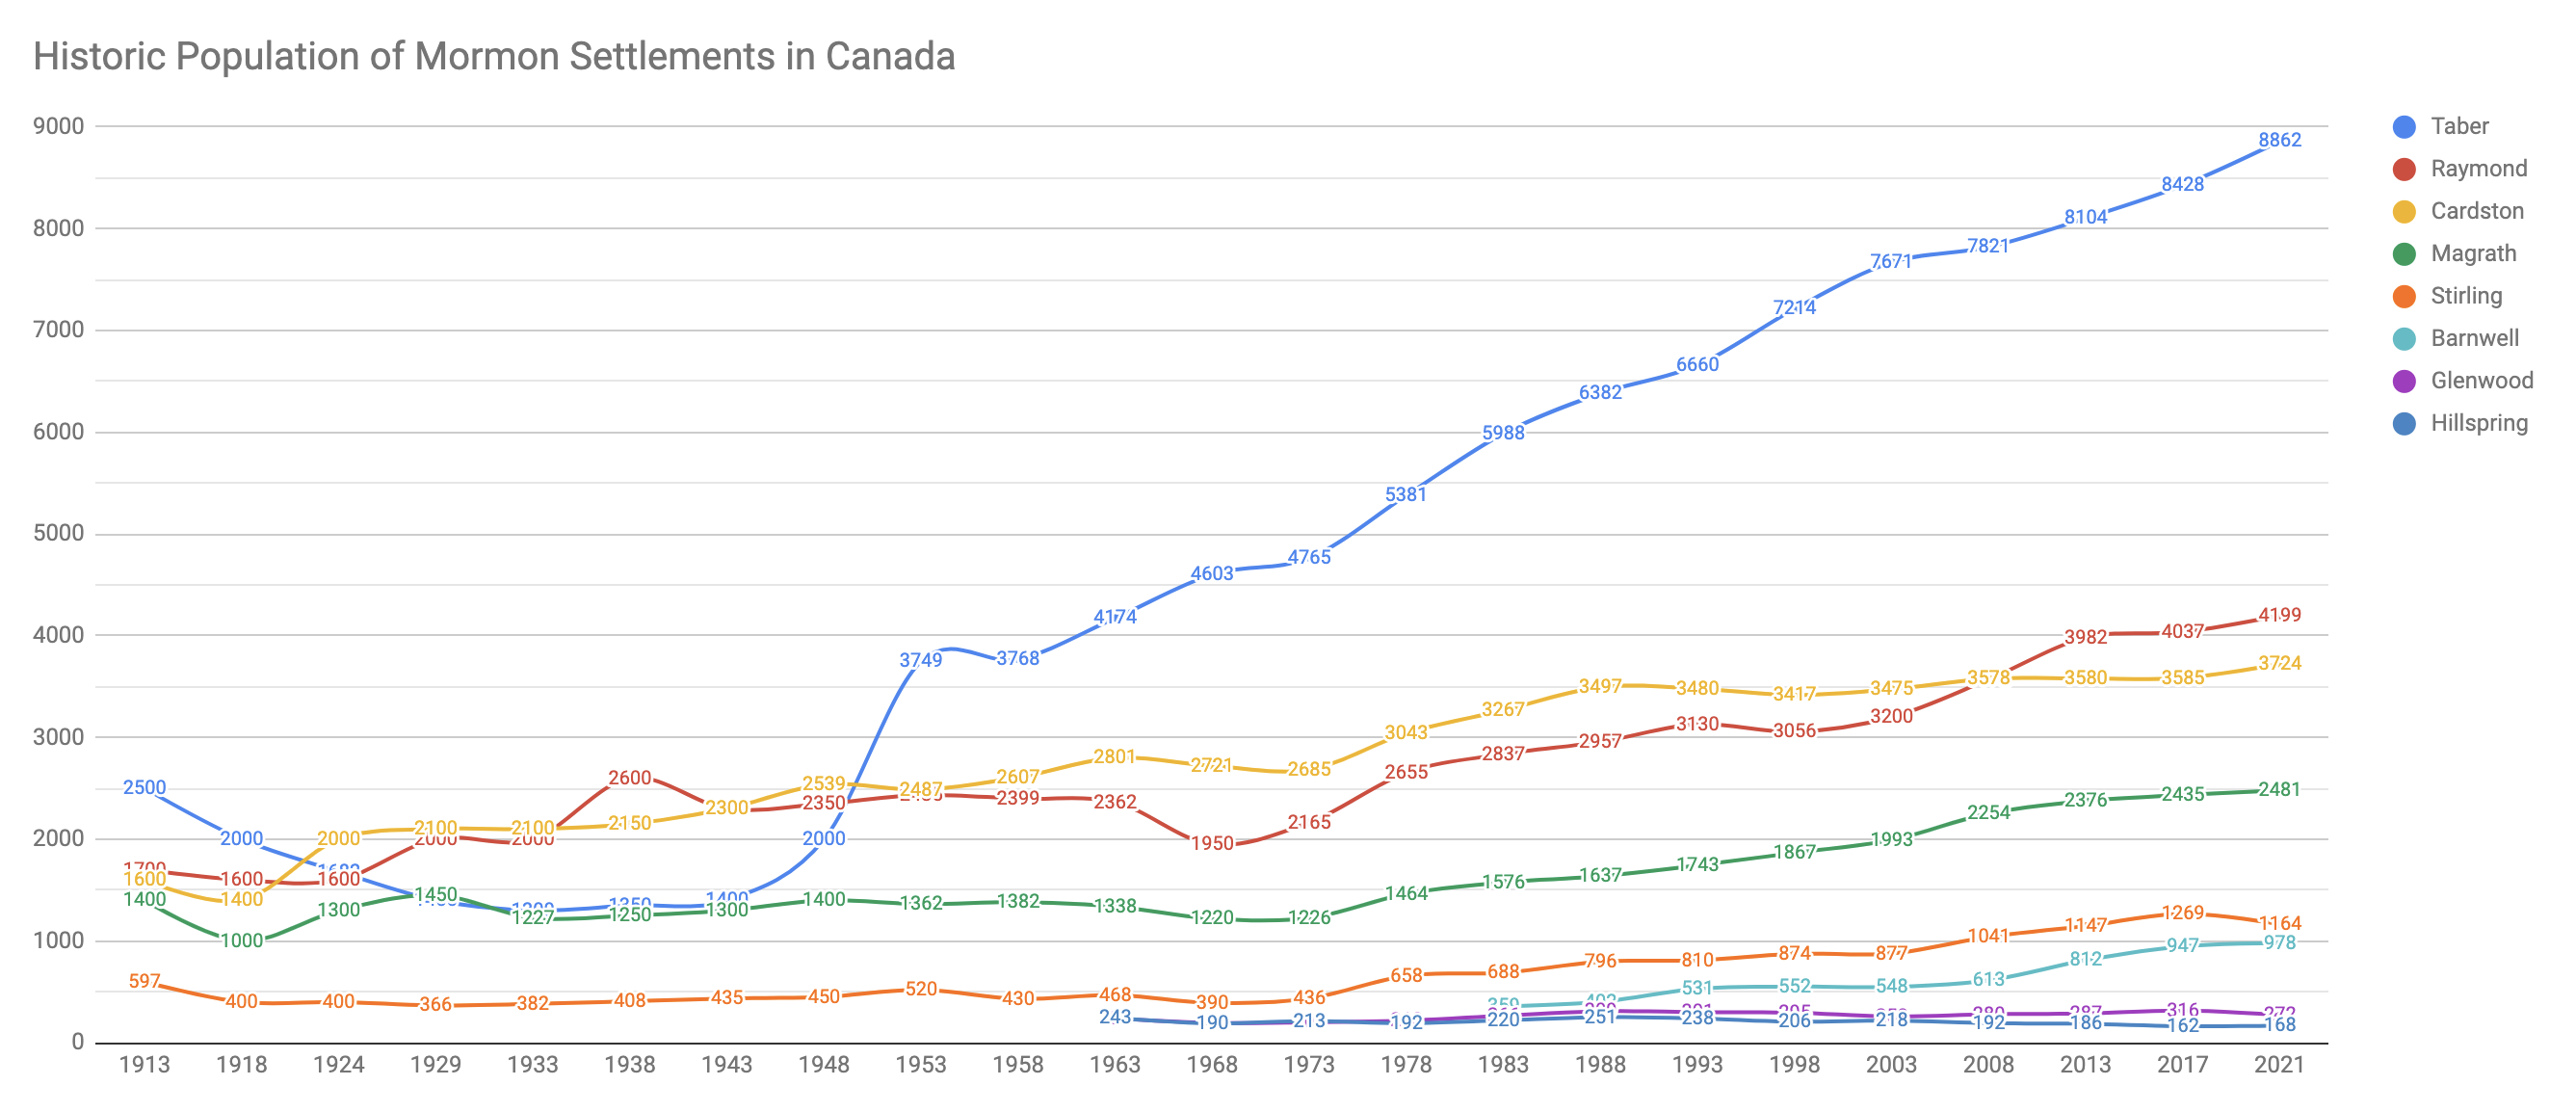 Historic population trends of Canadian Mormon settlements